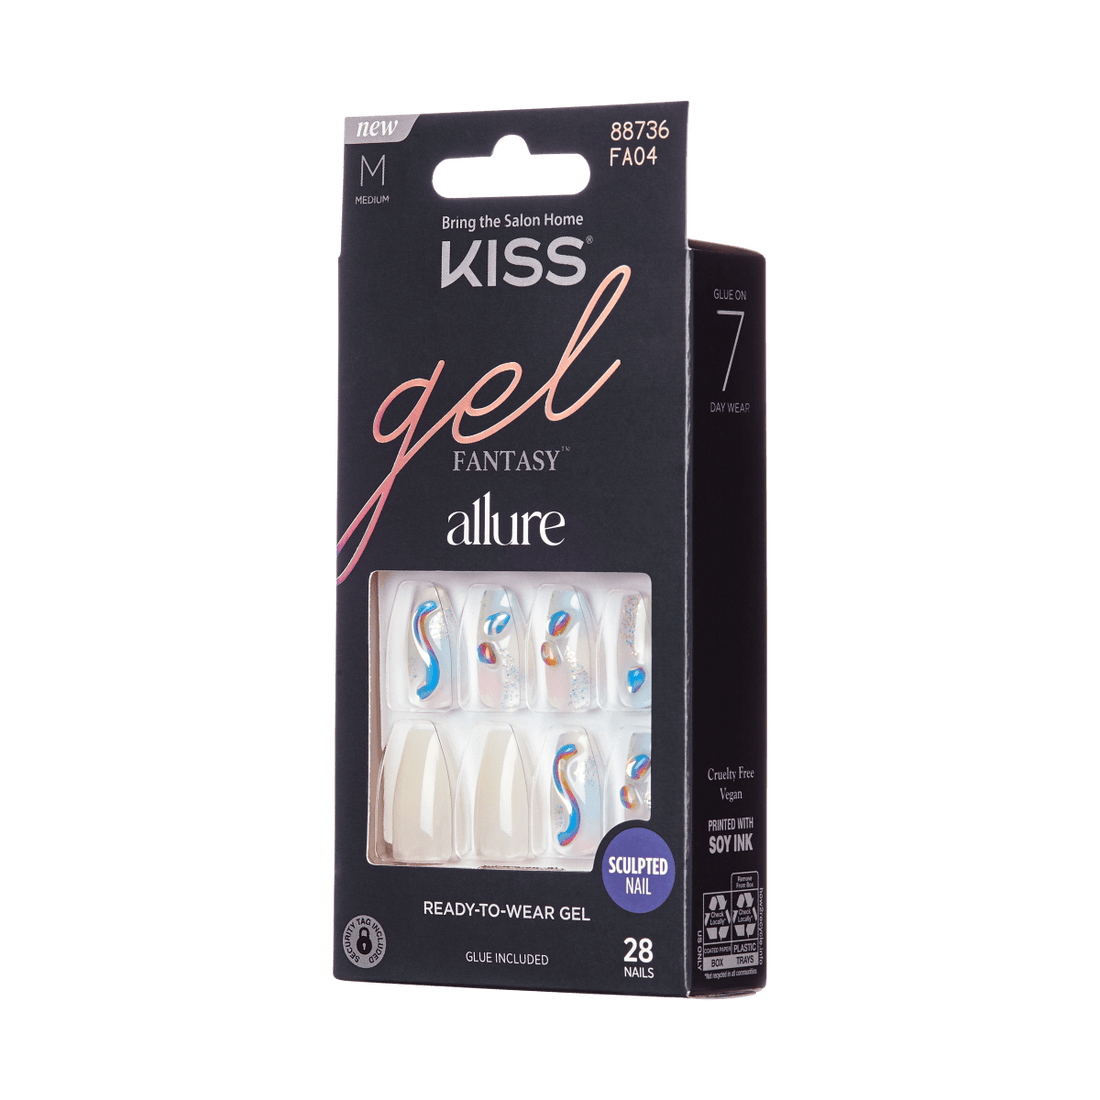 KISS Gel Fantasy, Press-On Nails, Band of Color, White, Med Coffin, 28ct